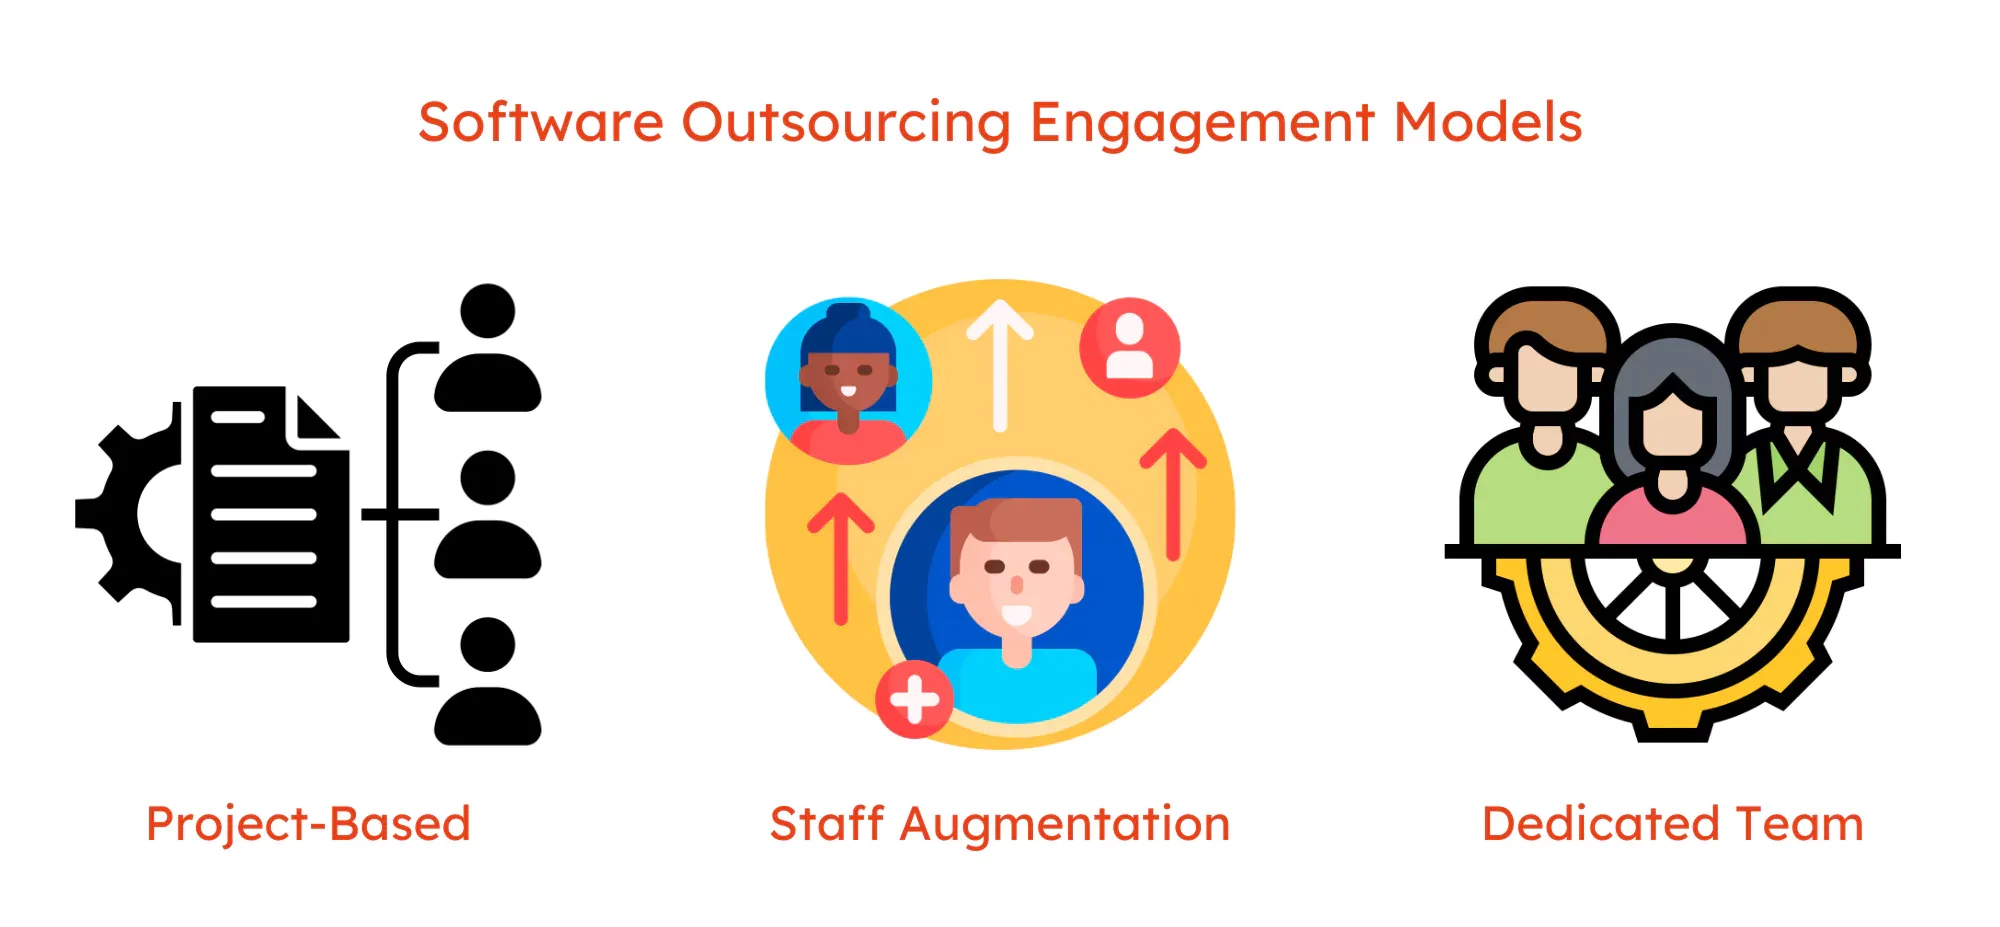 Software Outsourcing Engagement Models